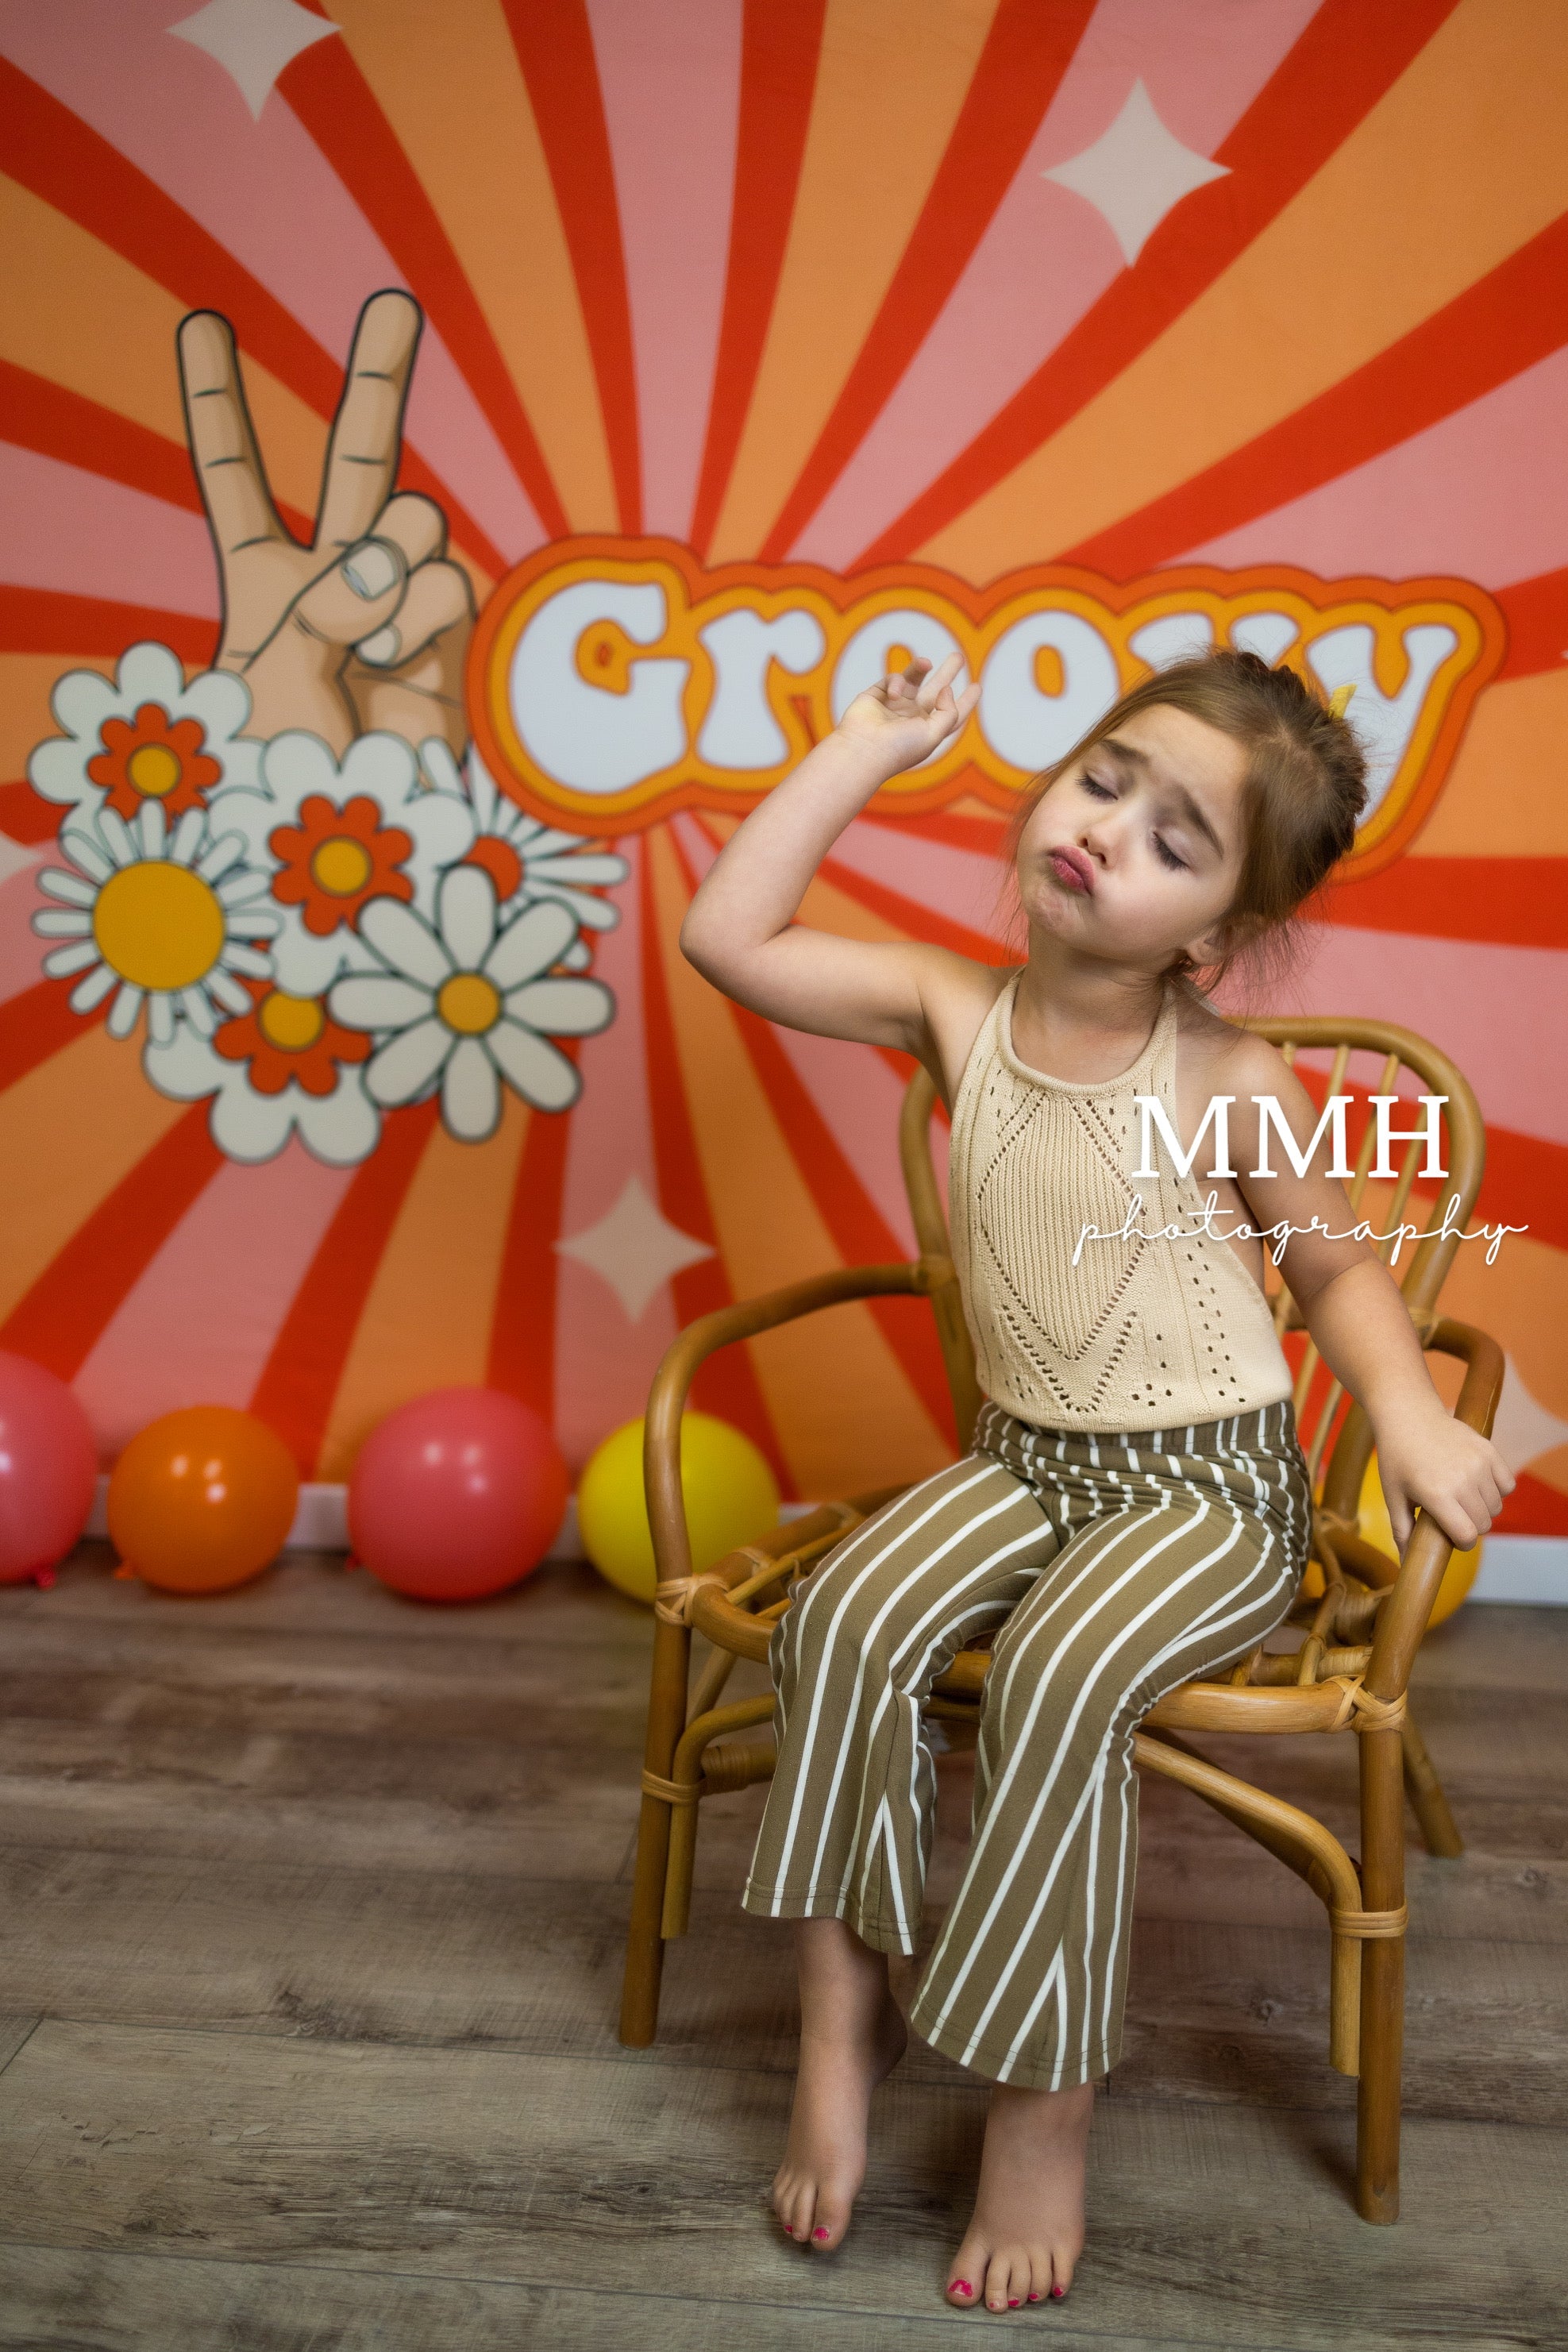 Kate 2 Groovy - 1970s Inspired 2nd Birthday Peace Flower Theme Backdrop Designed by Melissa McCraw-Hummer